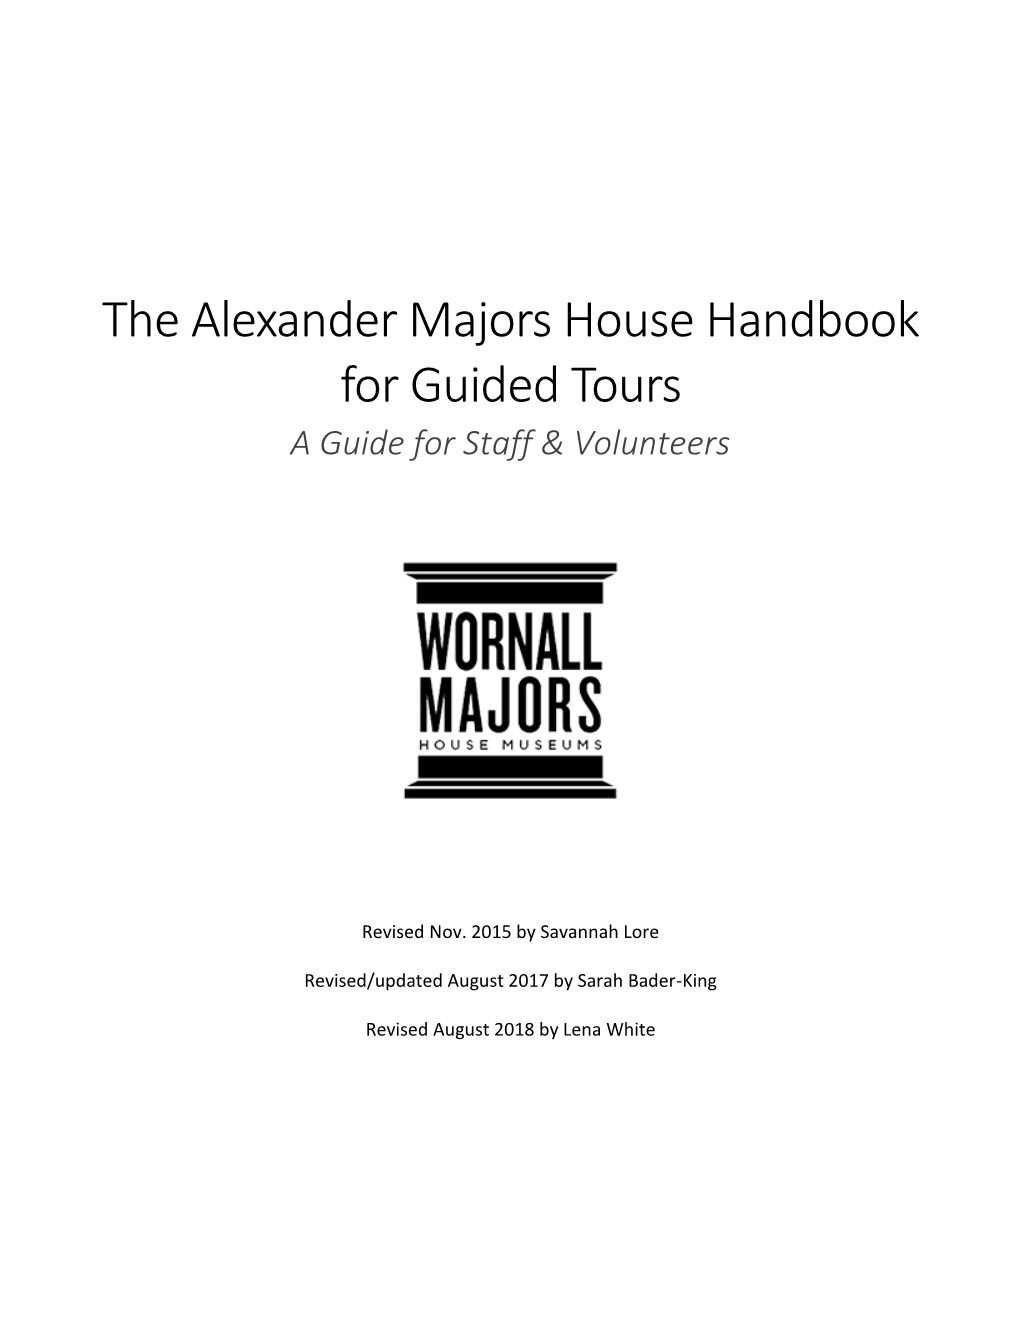 The Alexander Majors House Handbook for Guided Tours a Guide for Staff & Volunteers